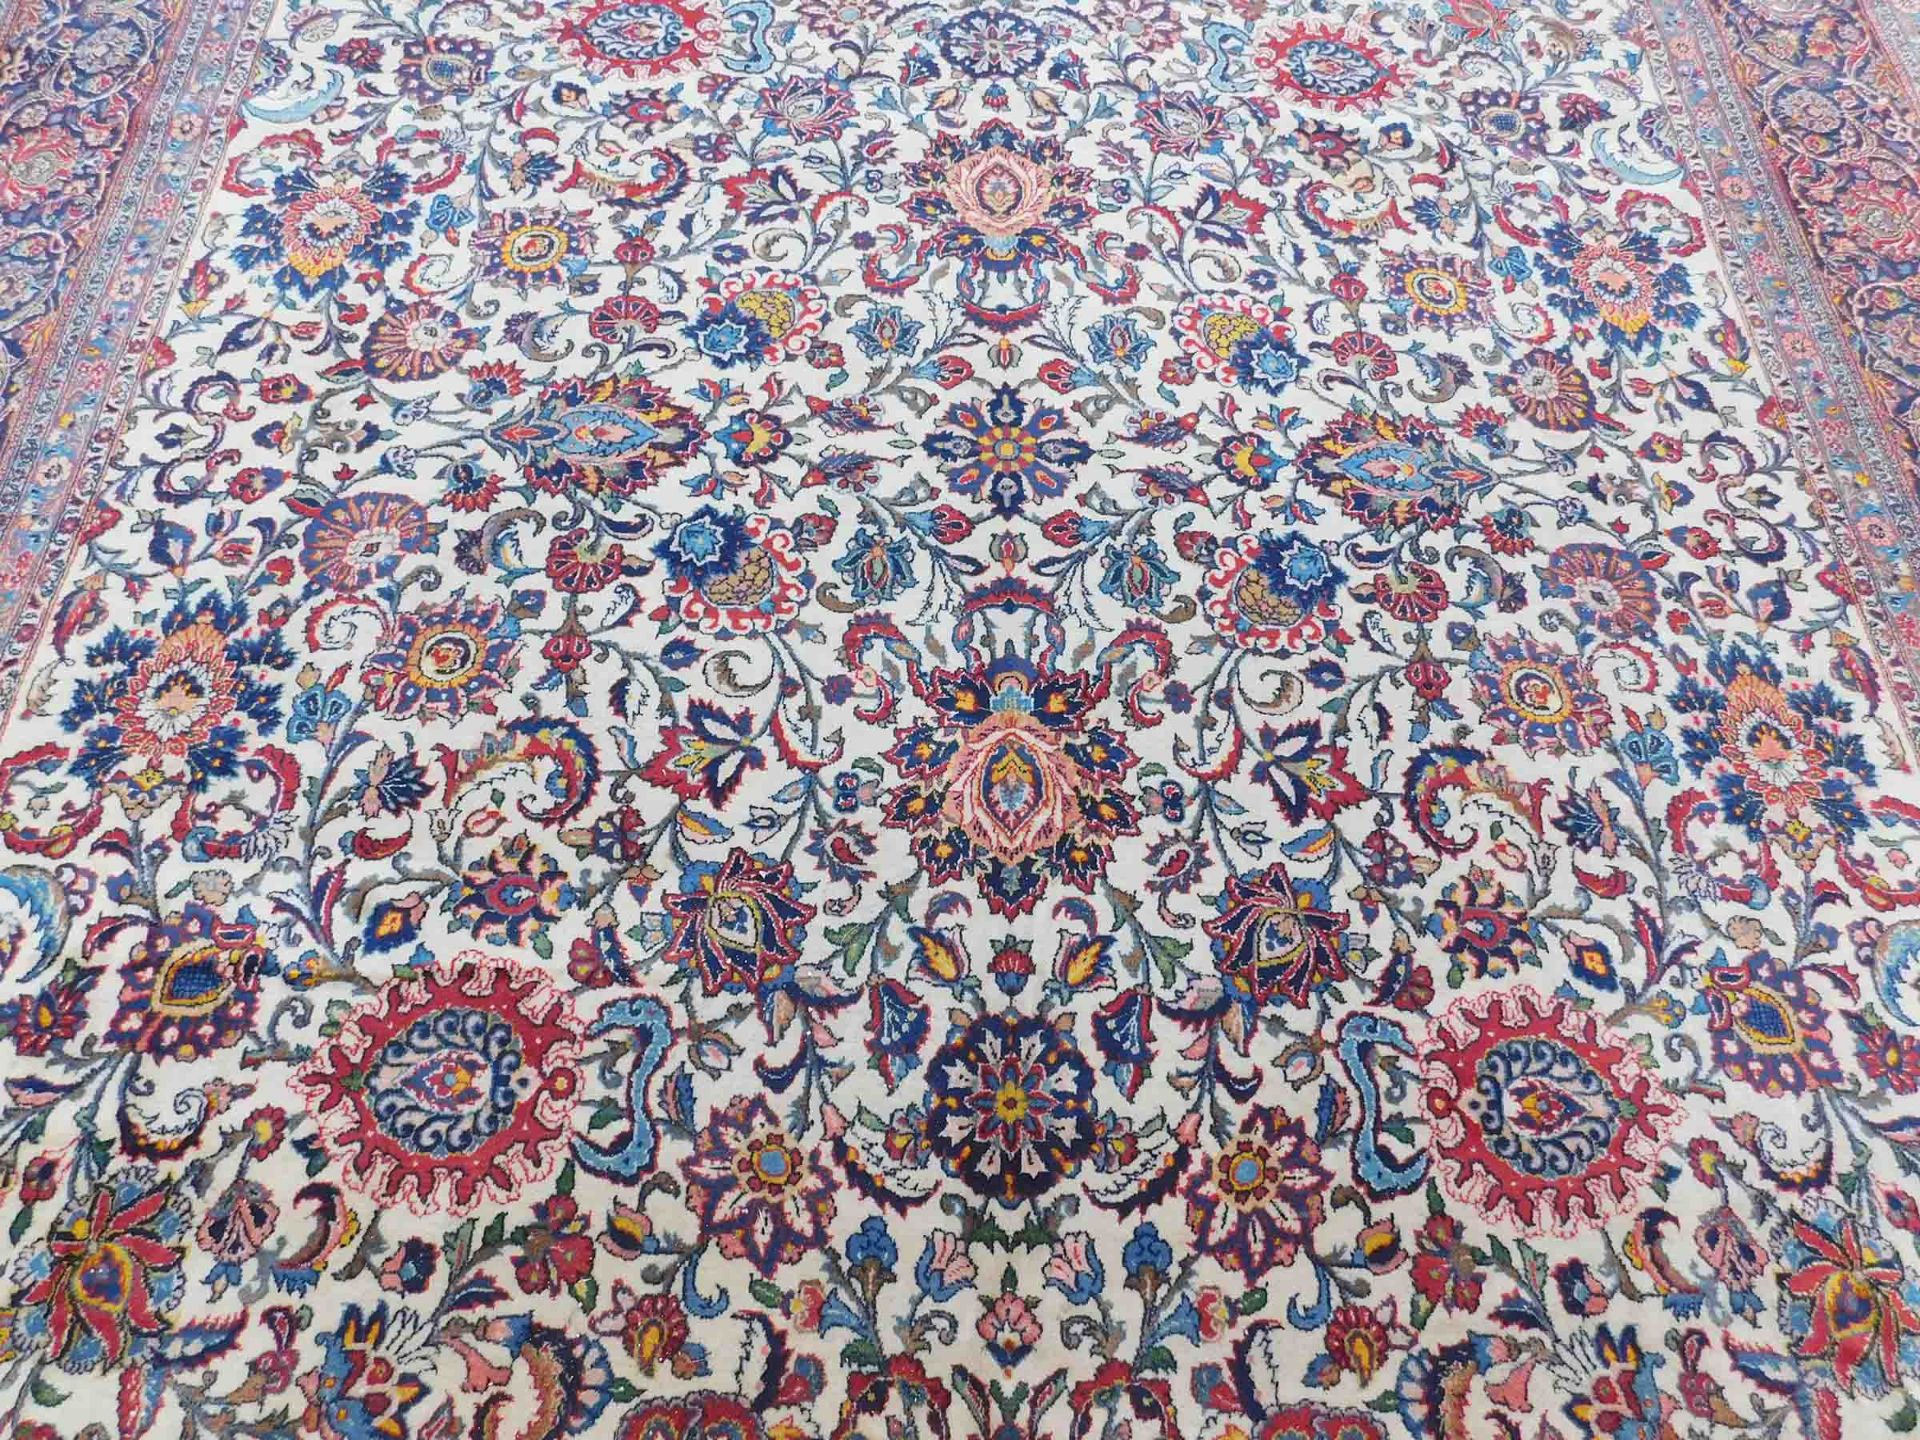 Keschan Persian carpet. Iran. Very fine weave. Cork wool.445 cm x 320 cm. Knotted by hand. Cork wool - Image 5 of 10